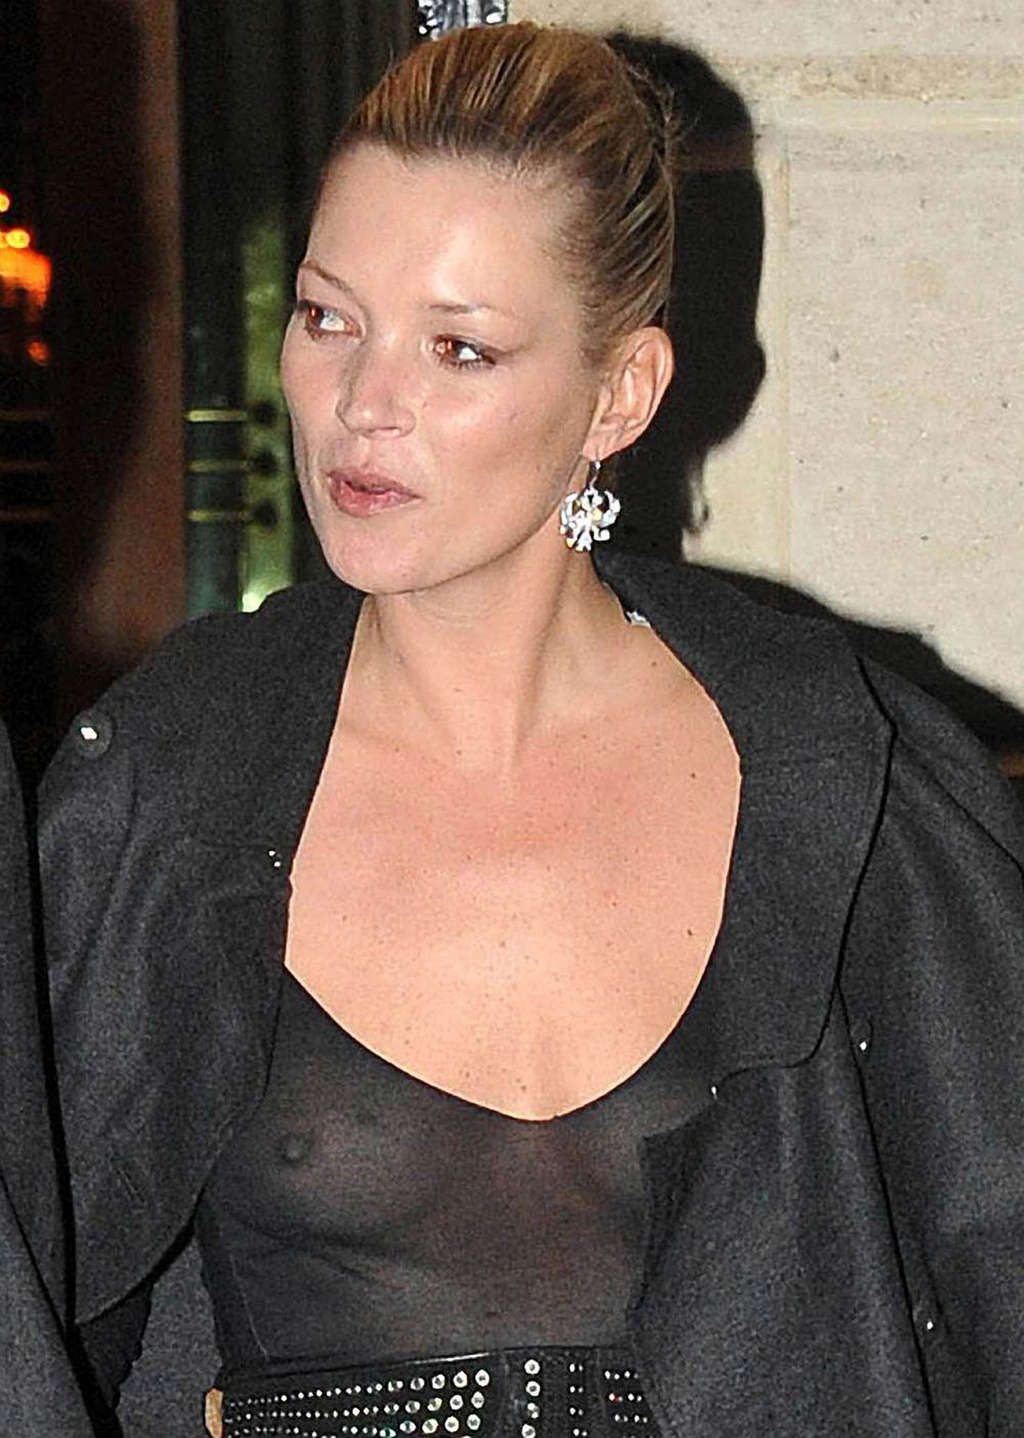 Kate Moss topless on yacht paparazzi pictures #75364351